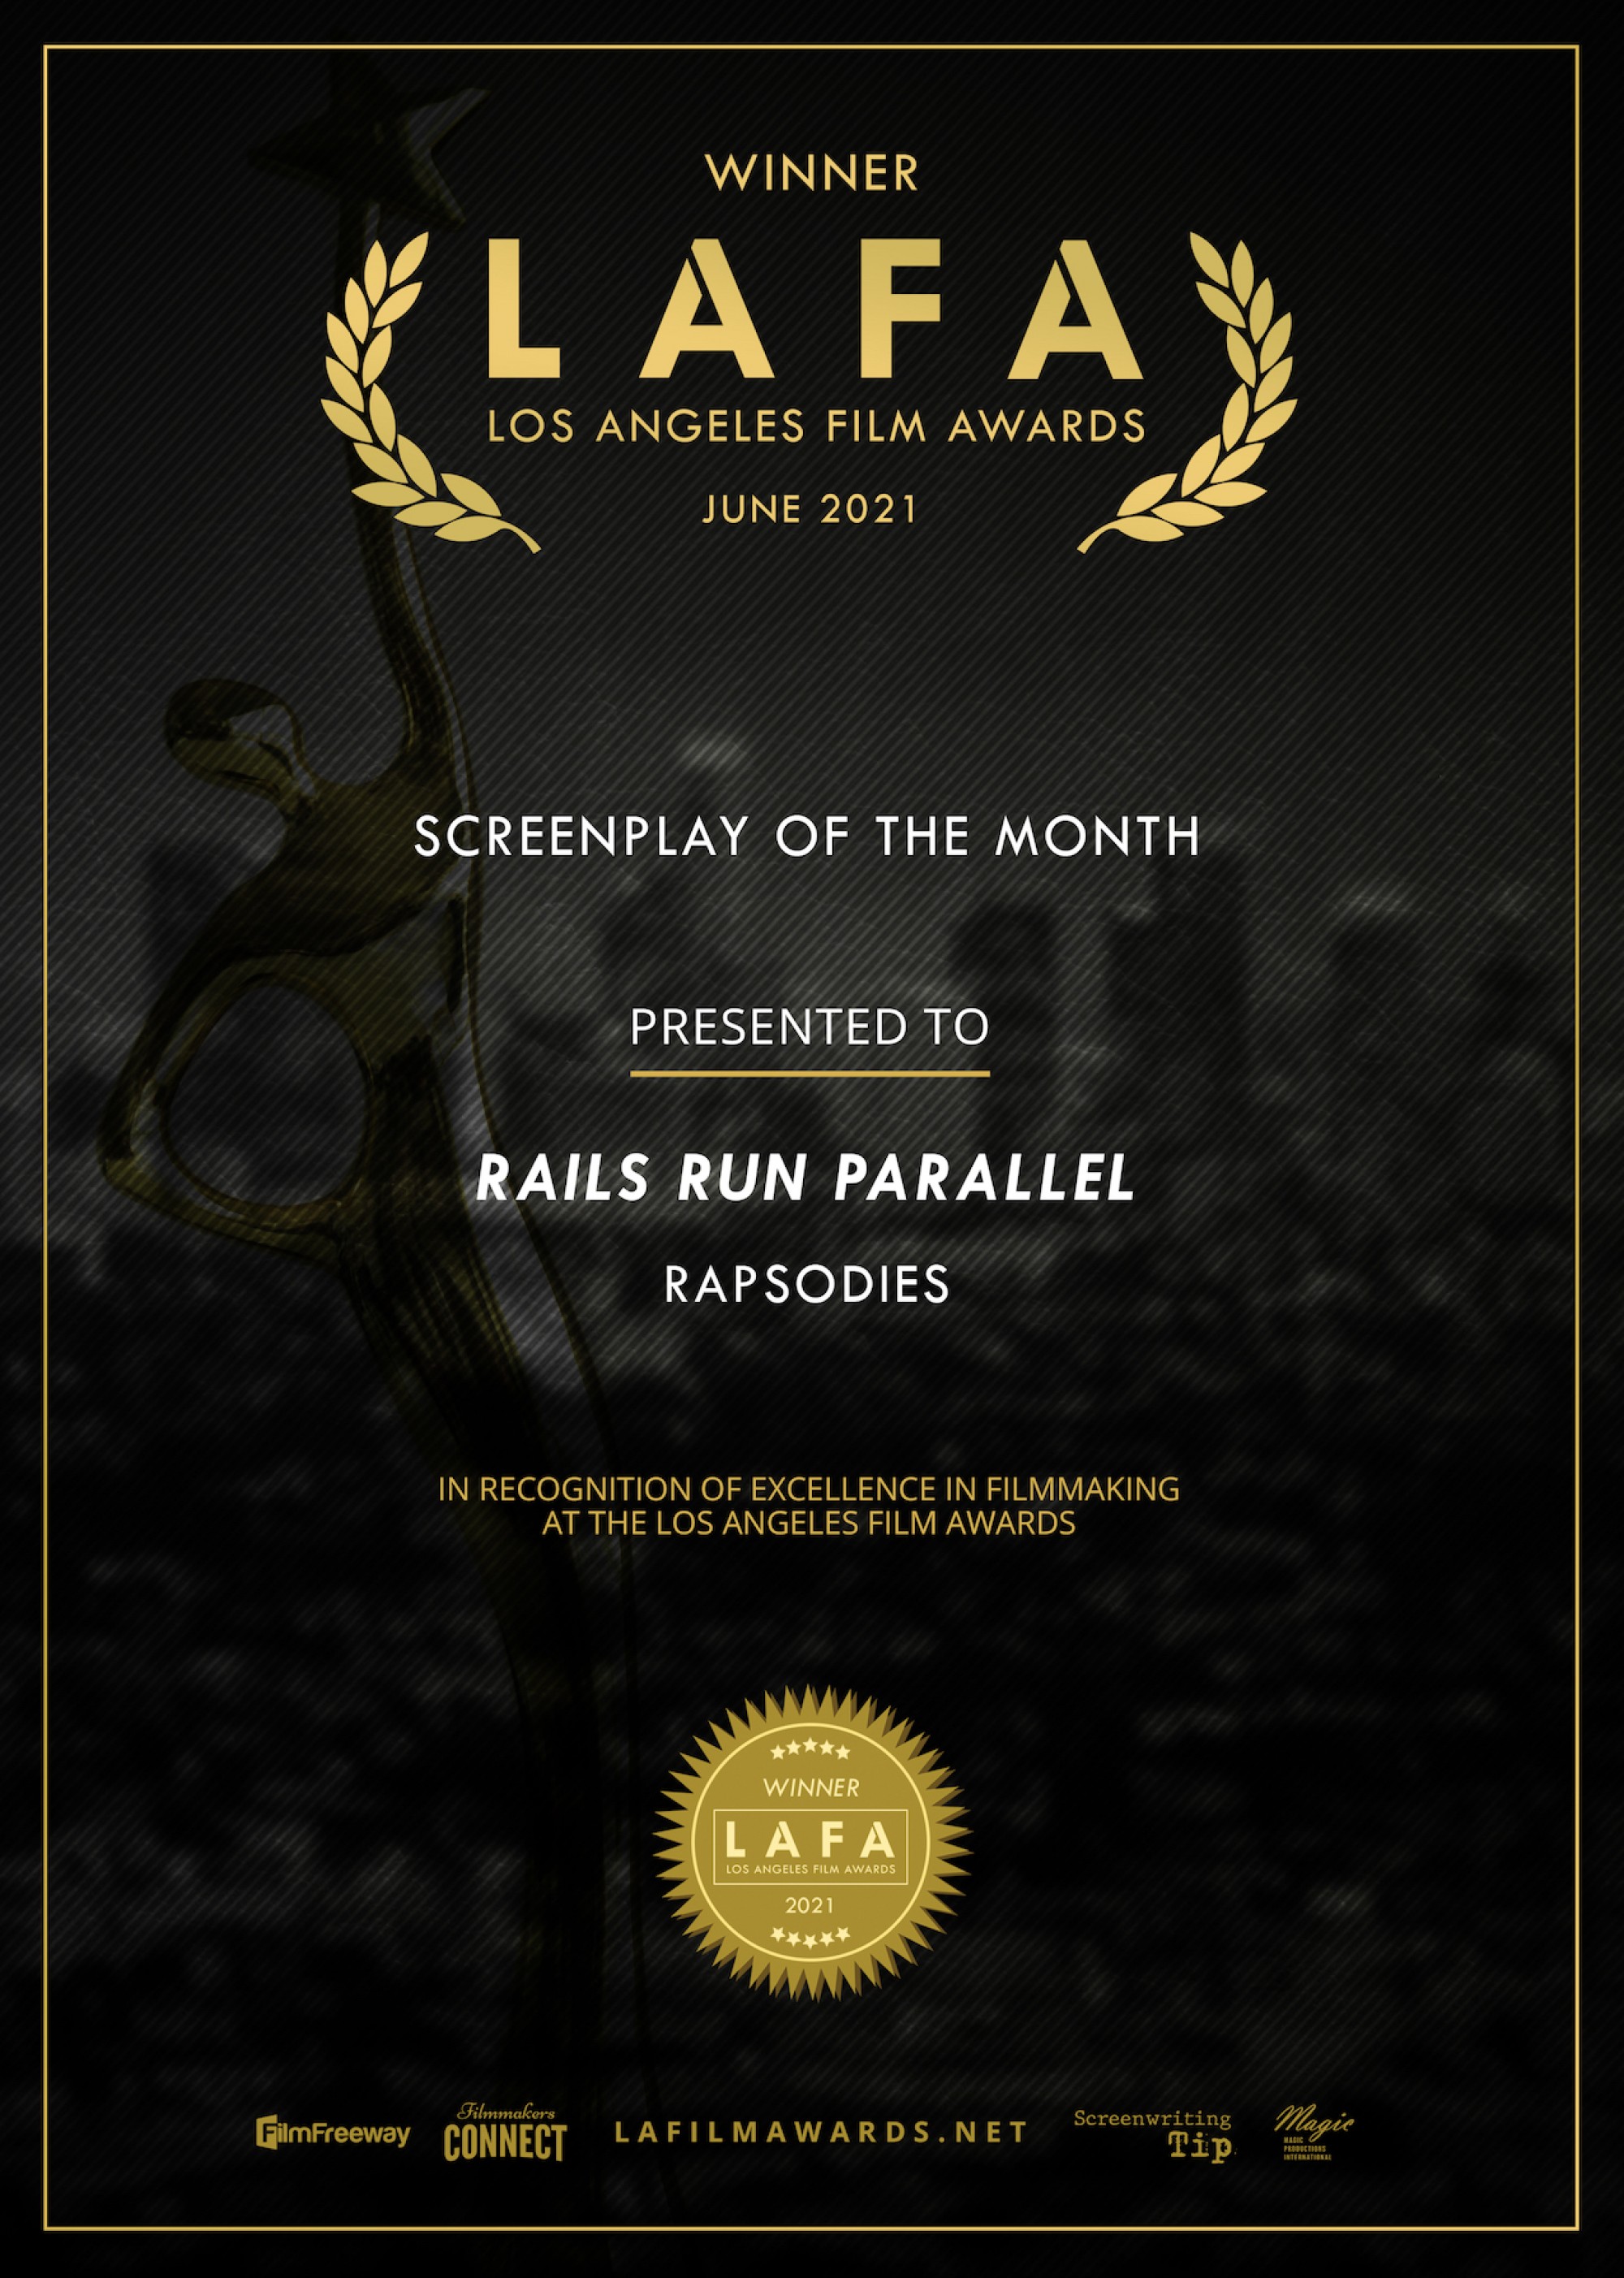 Rails Run Parallel - Screenplay of the Month